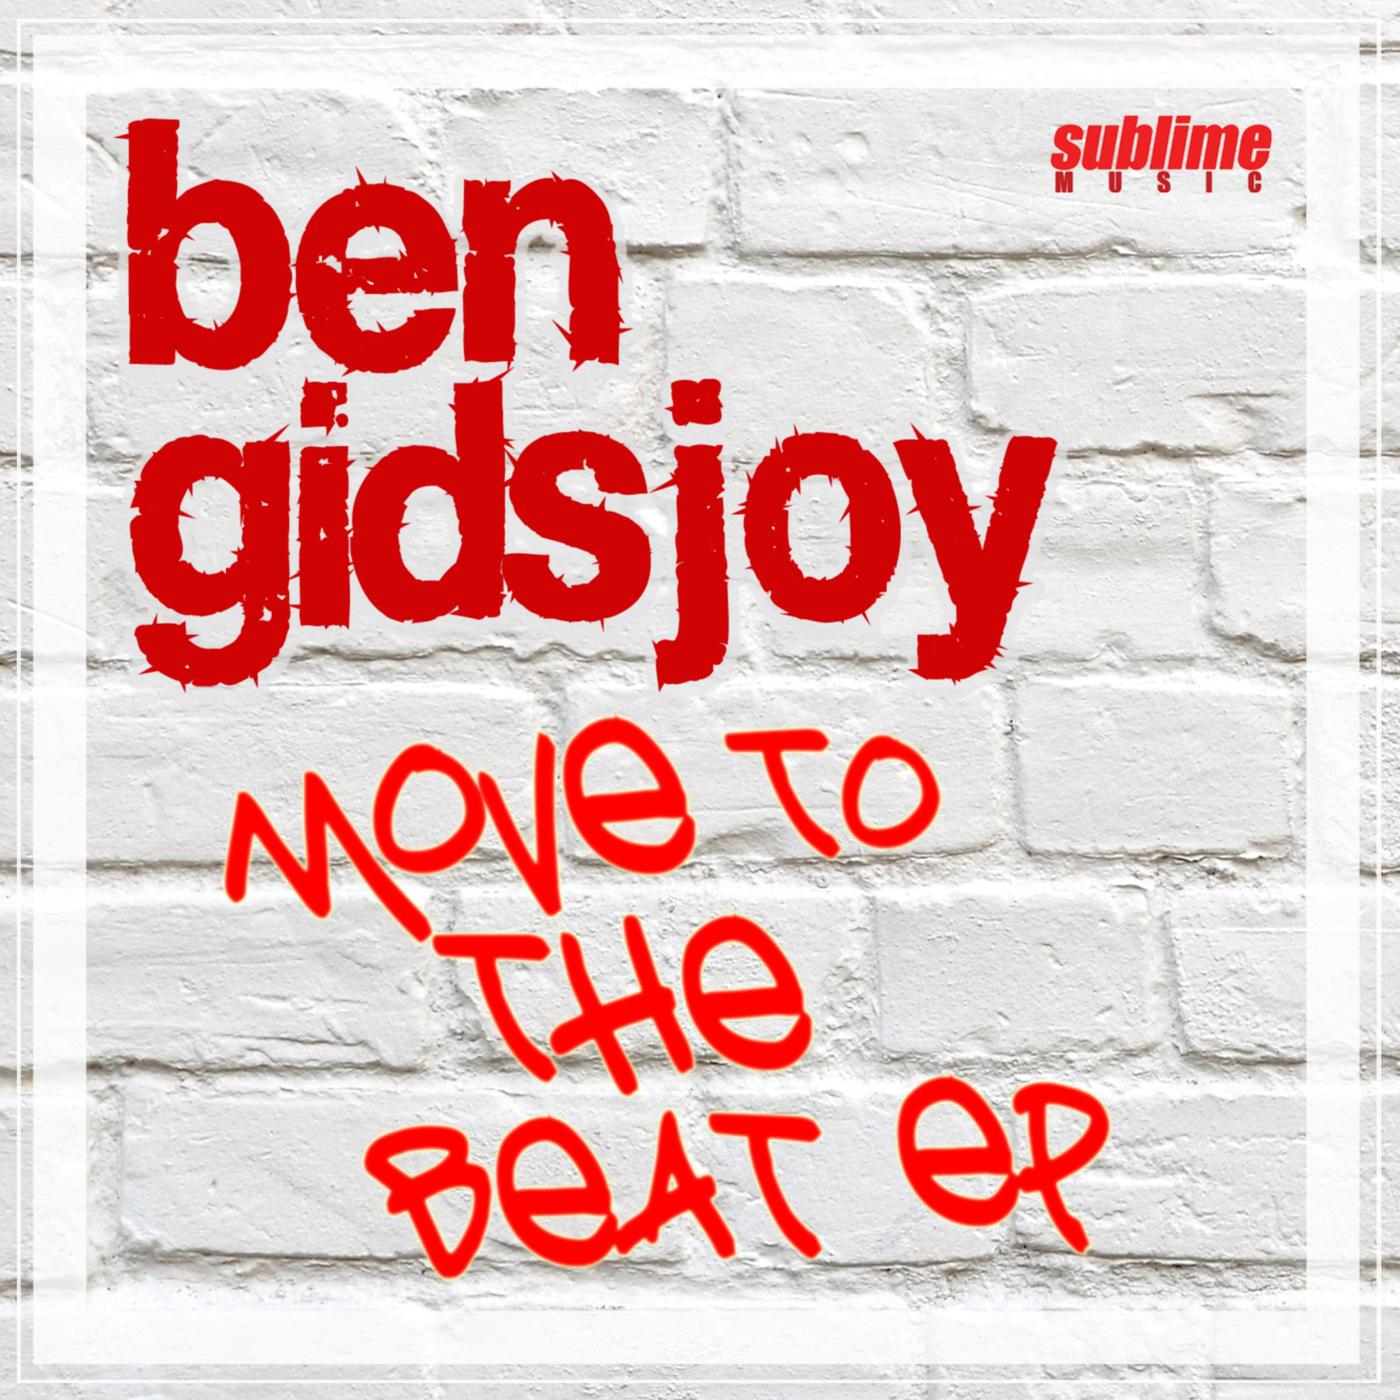 Move to the Beat EP